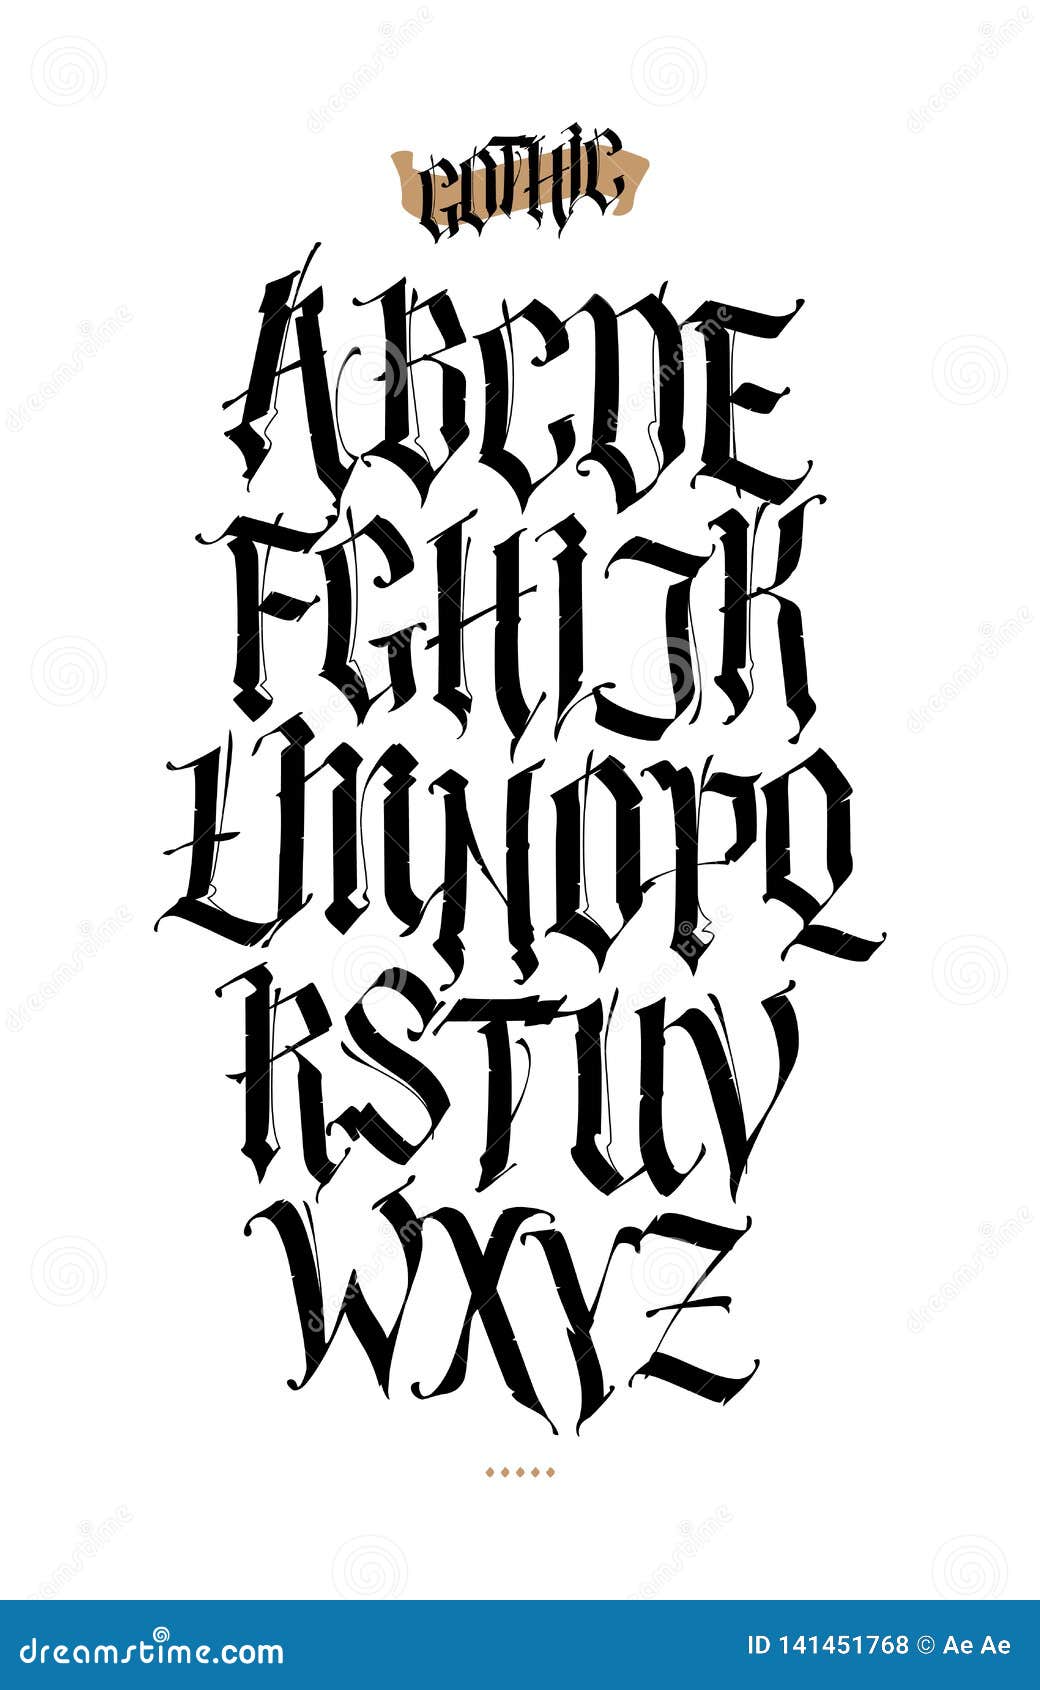 Gothic Stencil Font  Stencil font Lettering fonts Tattoo lettering fonts